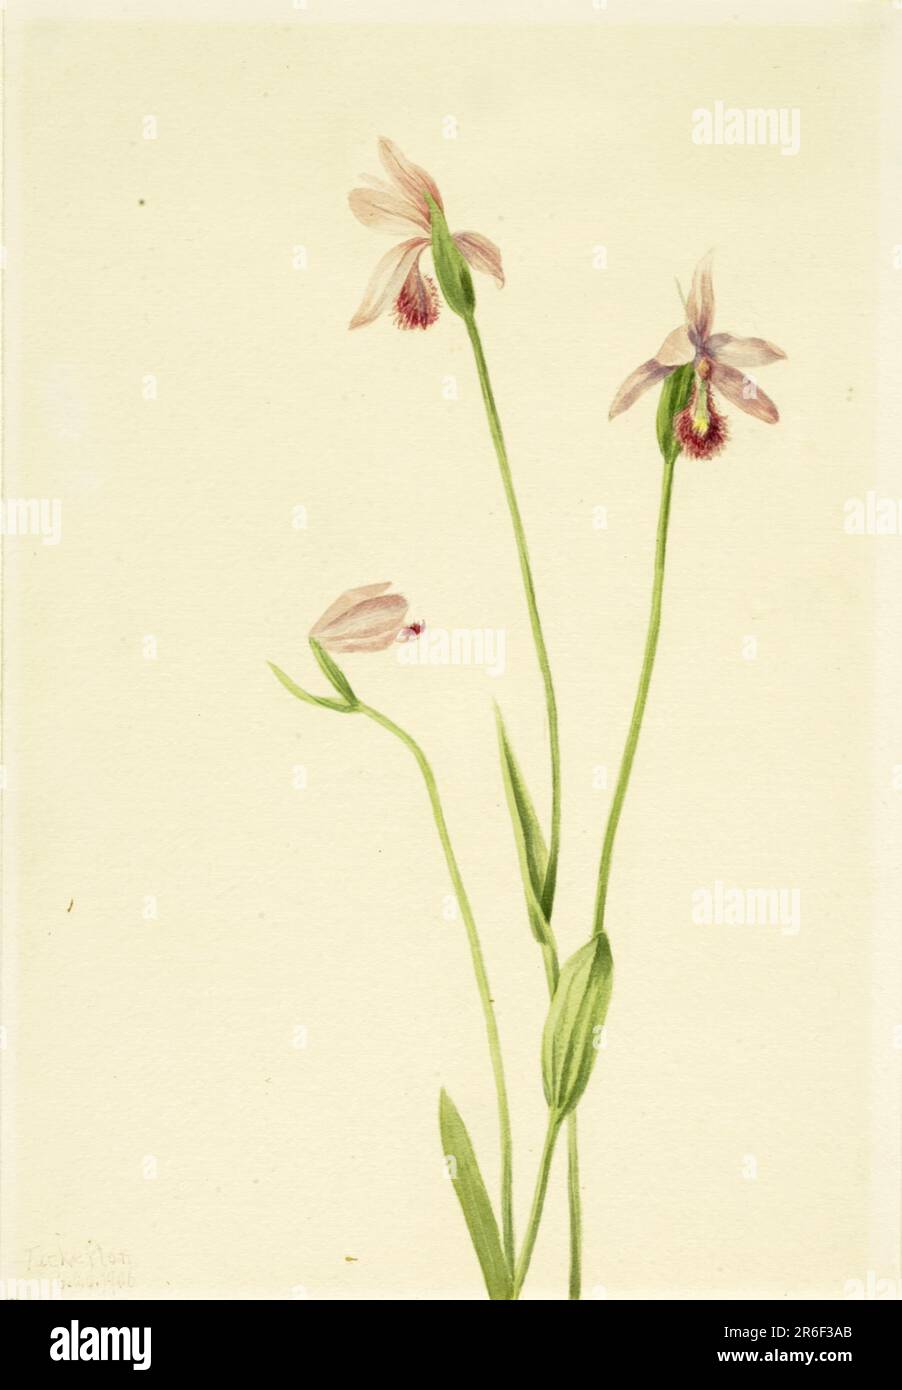 Rose Pogonia (Pogonia ophioglossoides). Date: 1906. Watercolor on paper. Museum: Smithsonian American Art Museum. Stock Photo